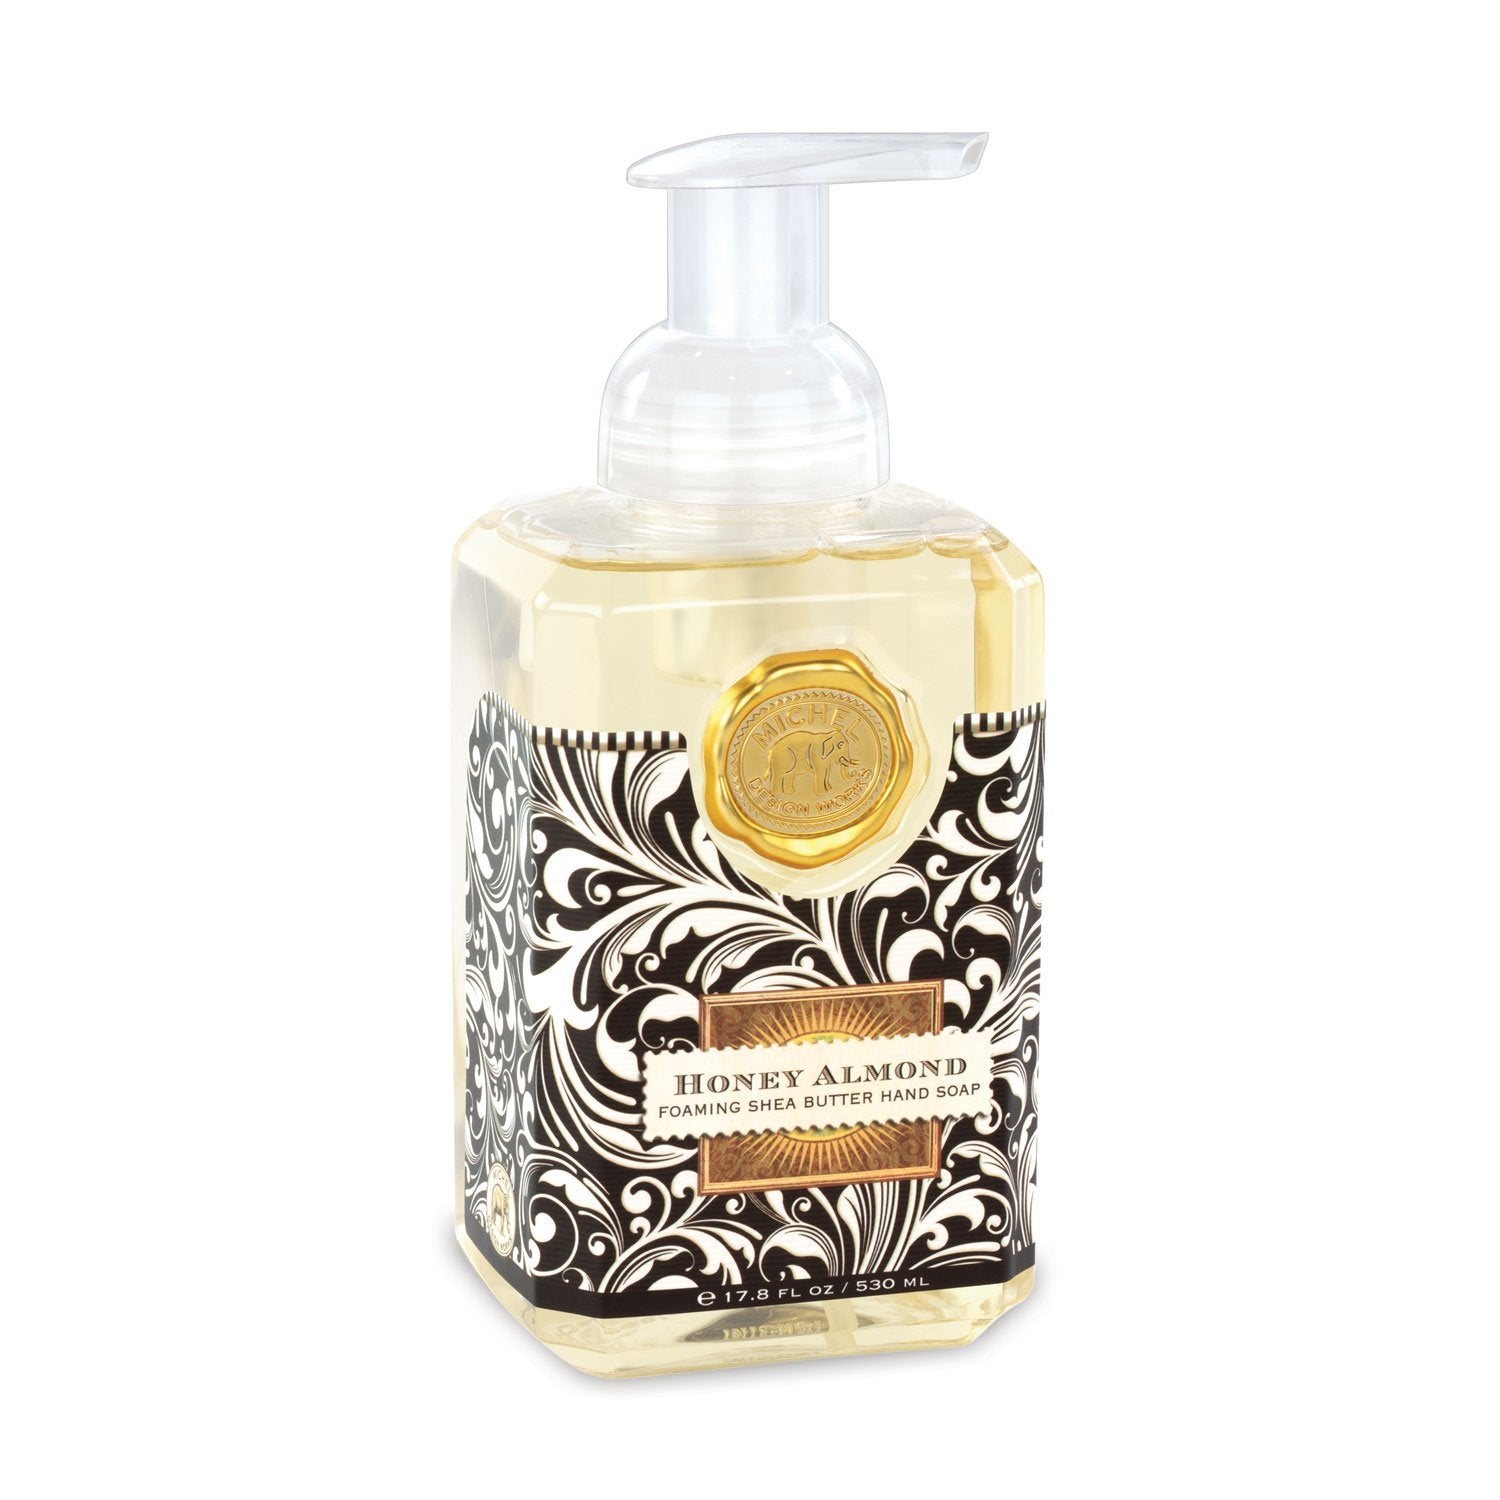 HONEY ALMOND FOAMING HAND SOAP FOA182 - Molly's! A Chic and Unique Boutique 